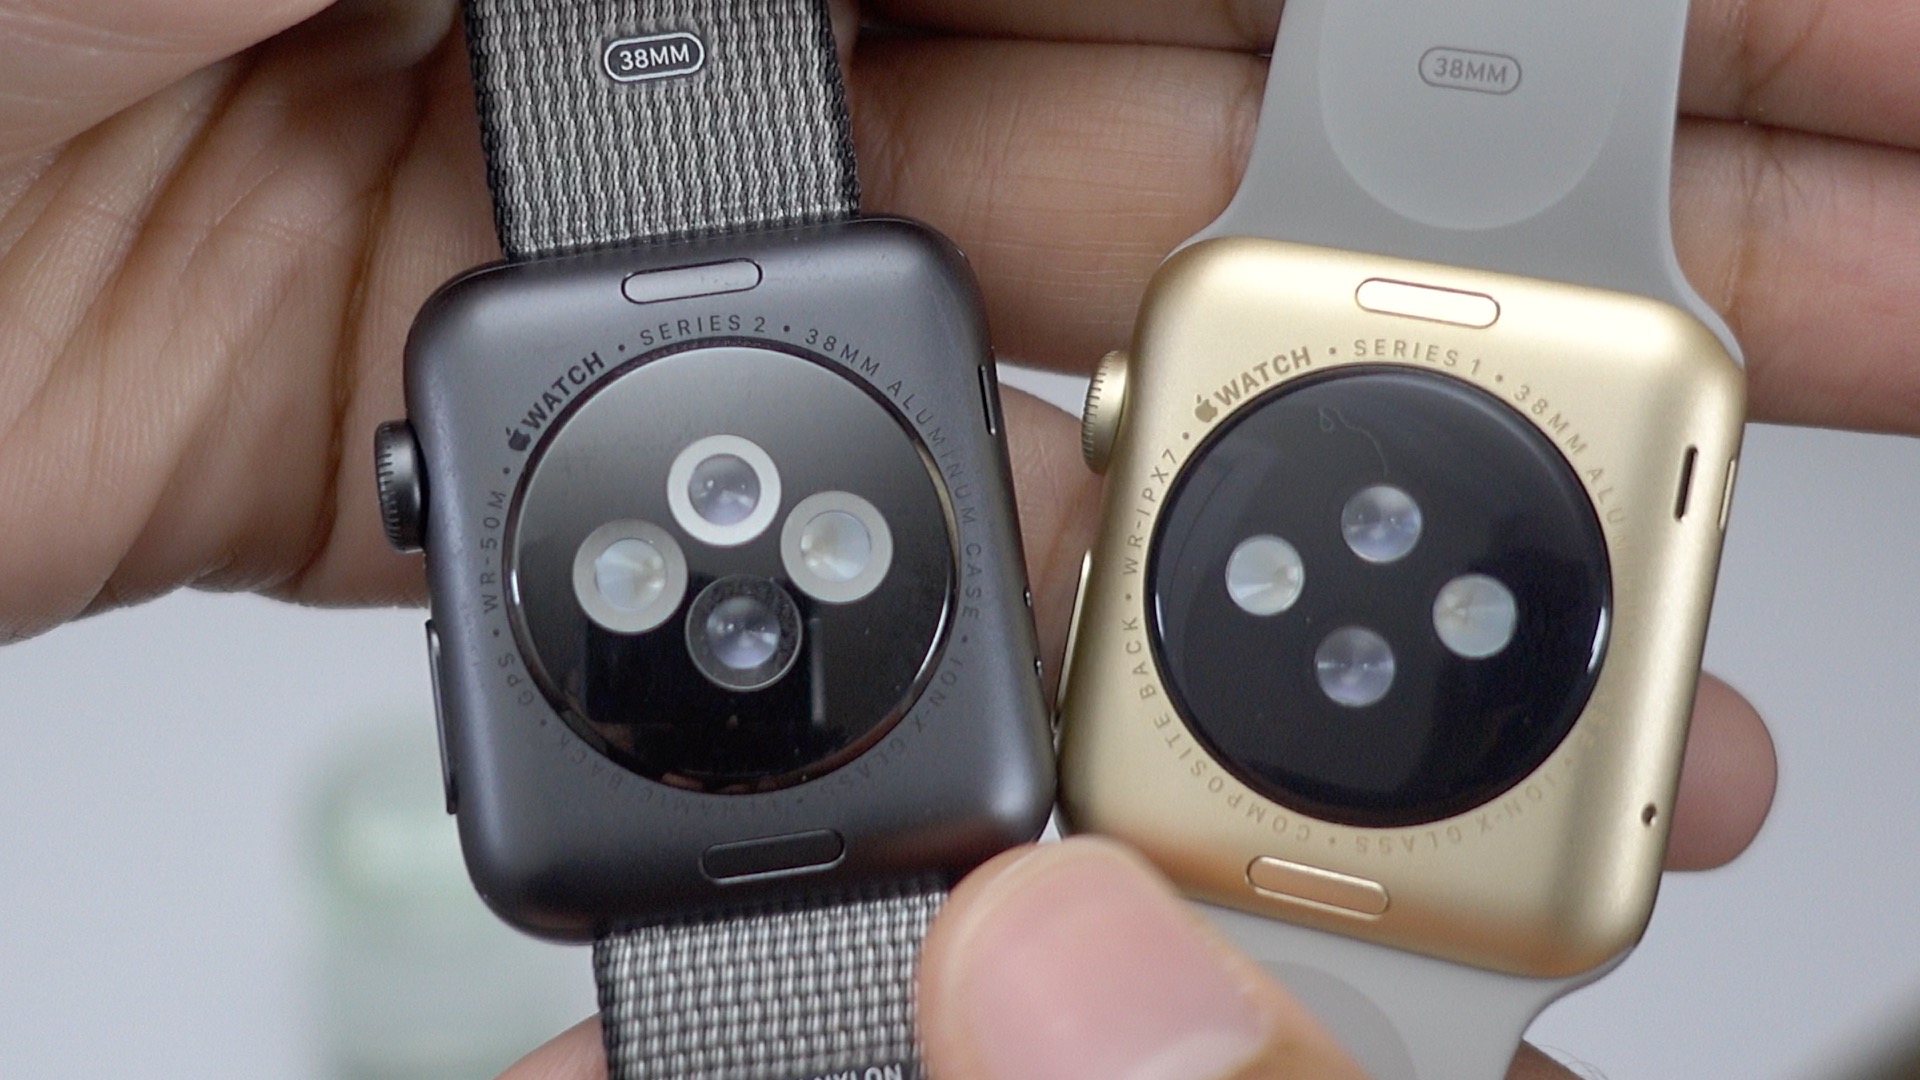 Top new Apple Watch Series 1 and Series 2 features - which one should you  buy? [Video] - 9to5Mac